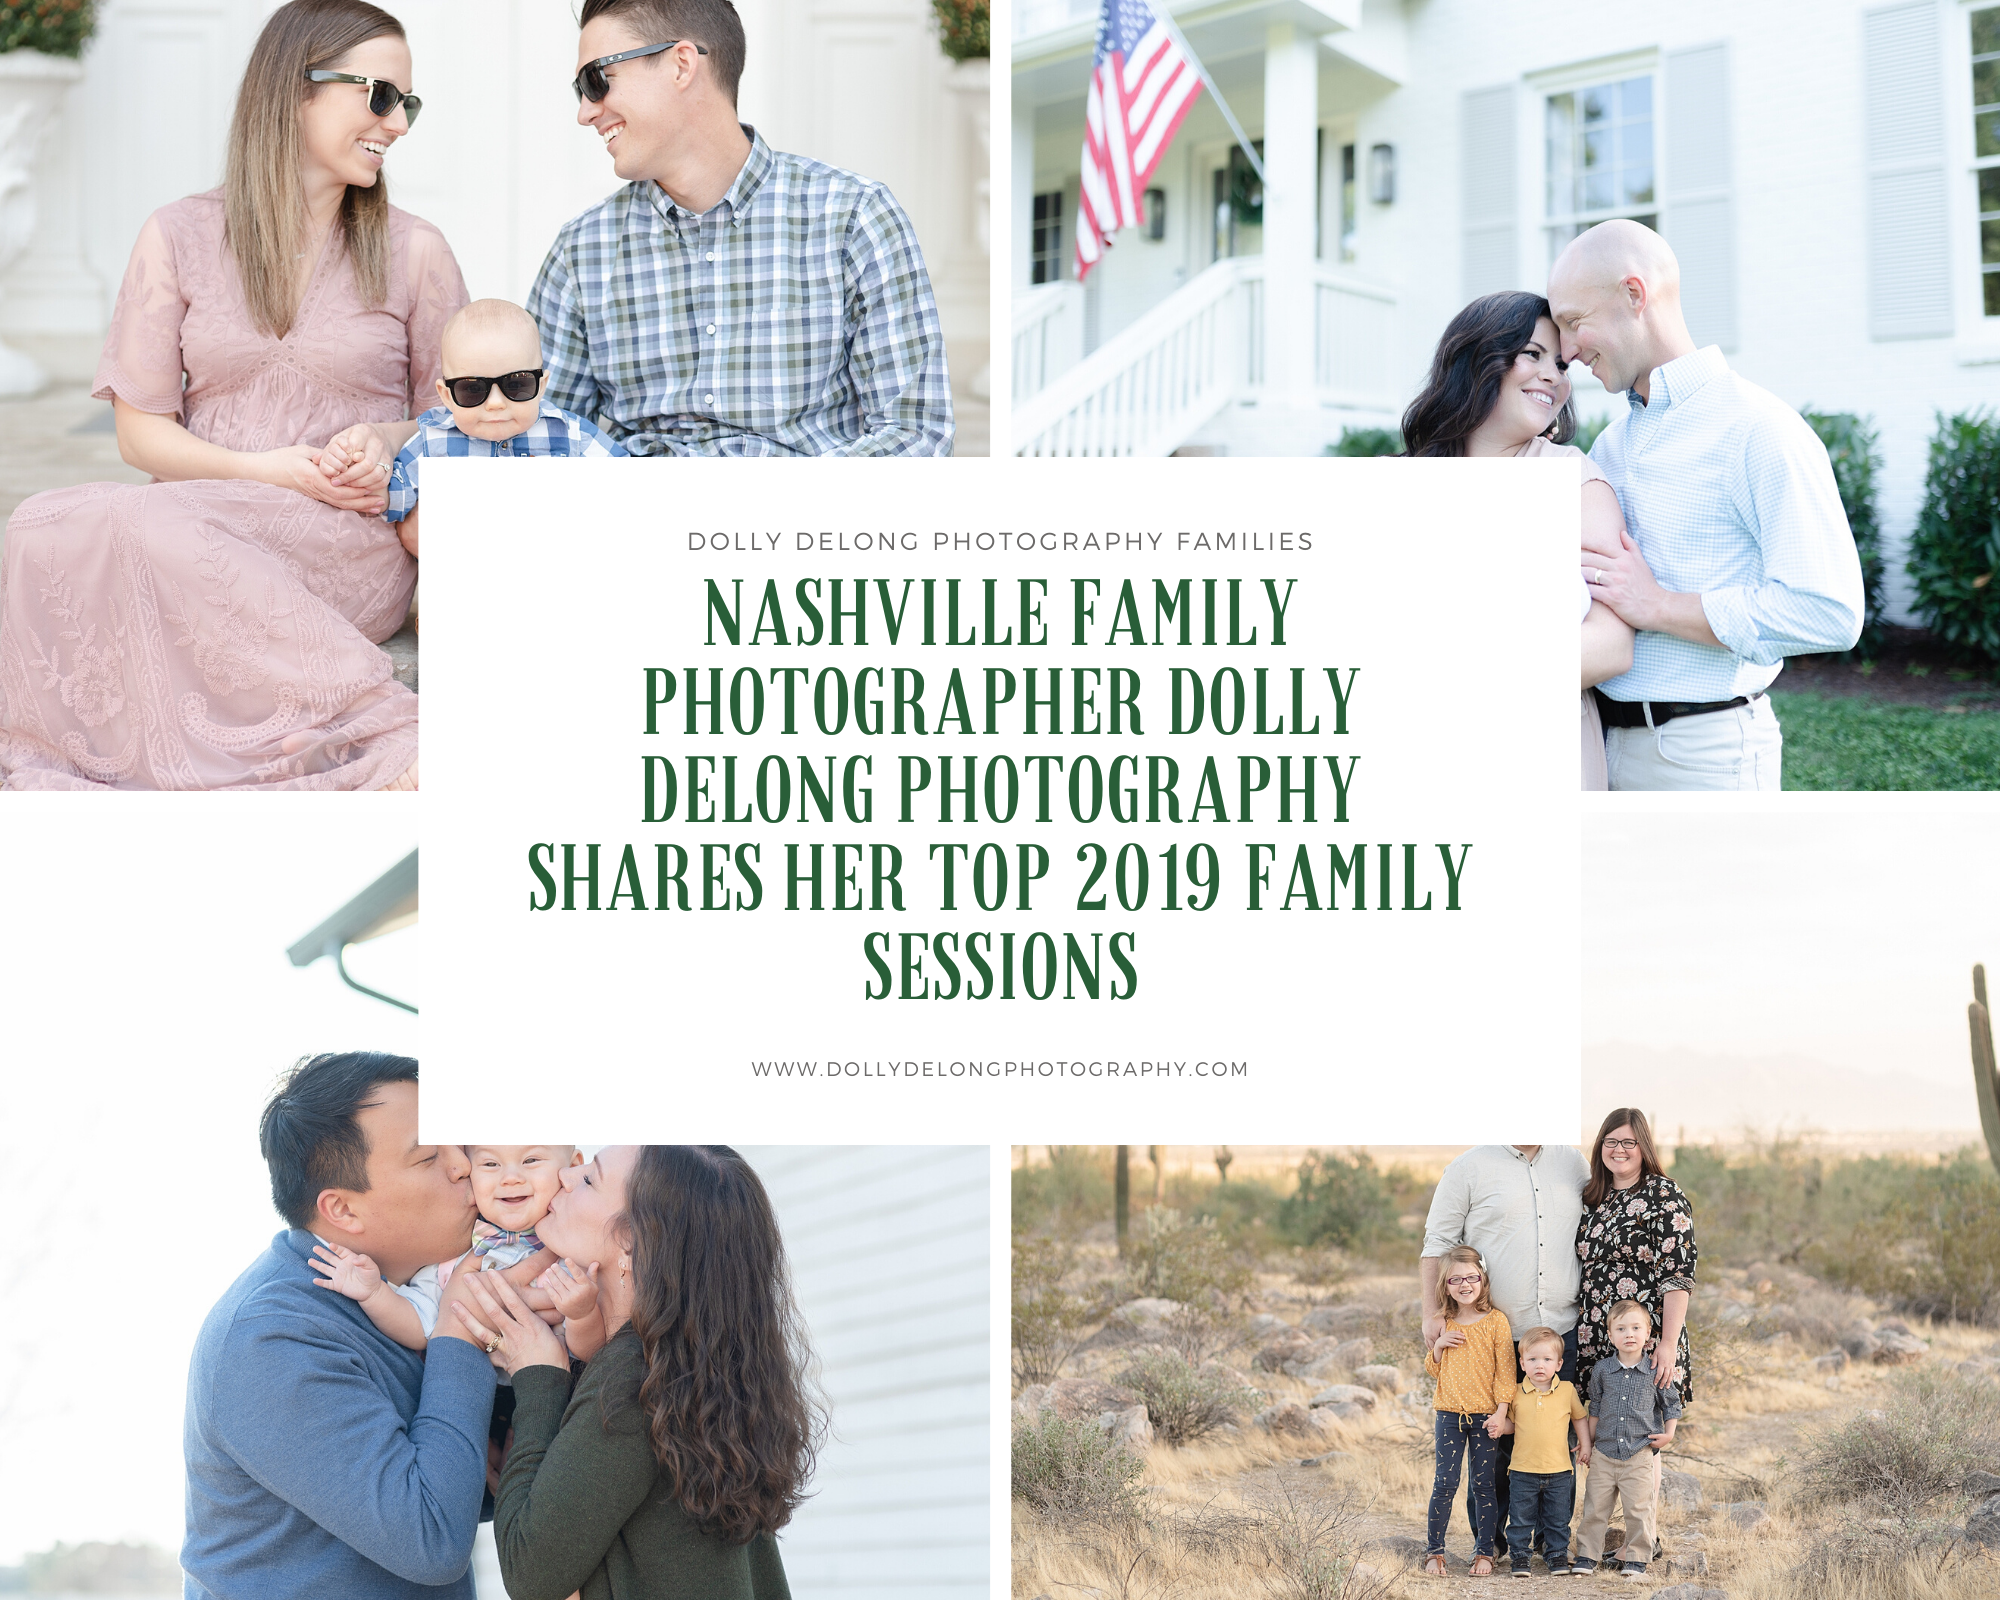 nashville family photographer Dolly DeLong Photography shares her top 2019 family sessions